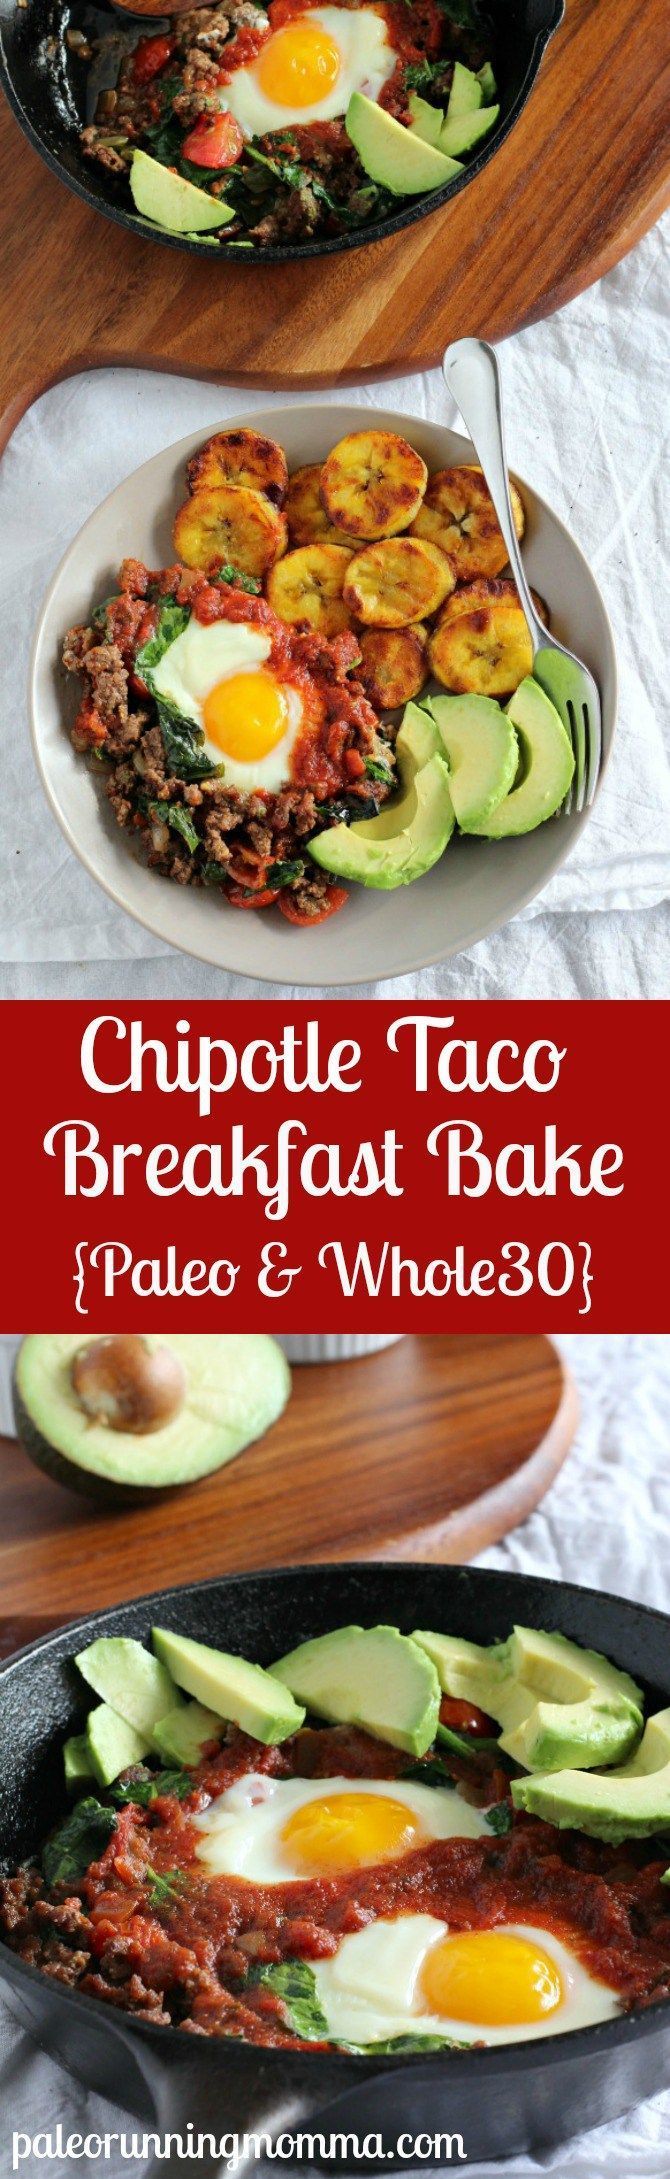 This delicious chipotle taco breakfast bake is perfect for anyone on the Paleo diet. Its grain-fr